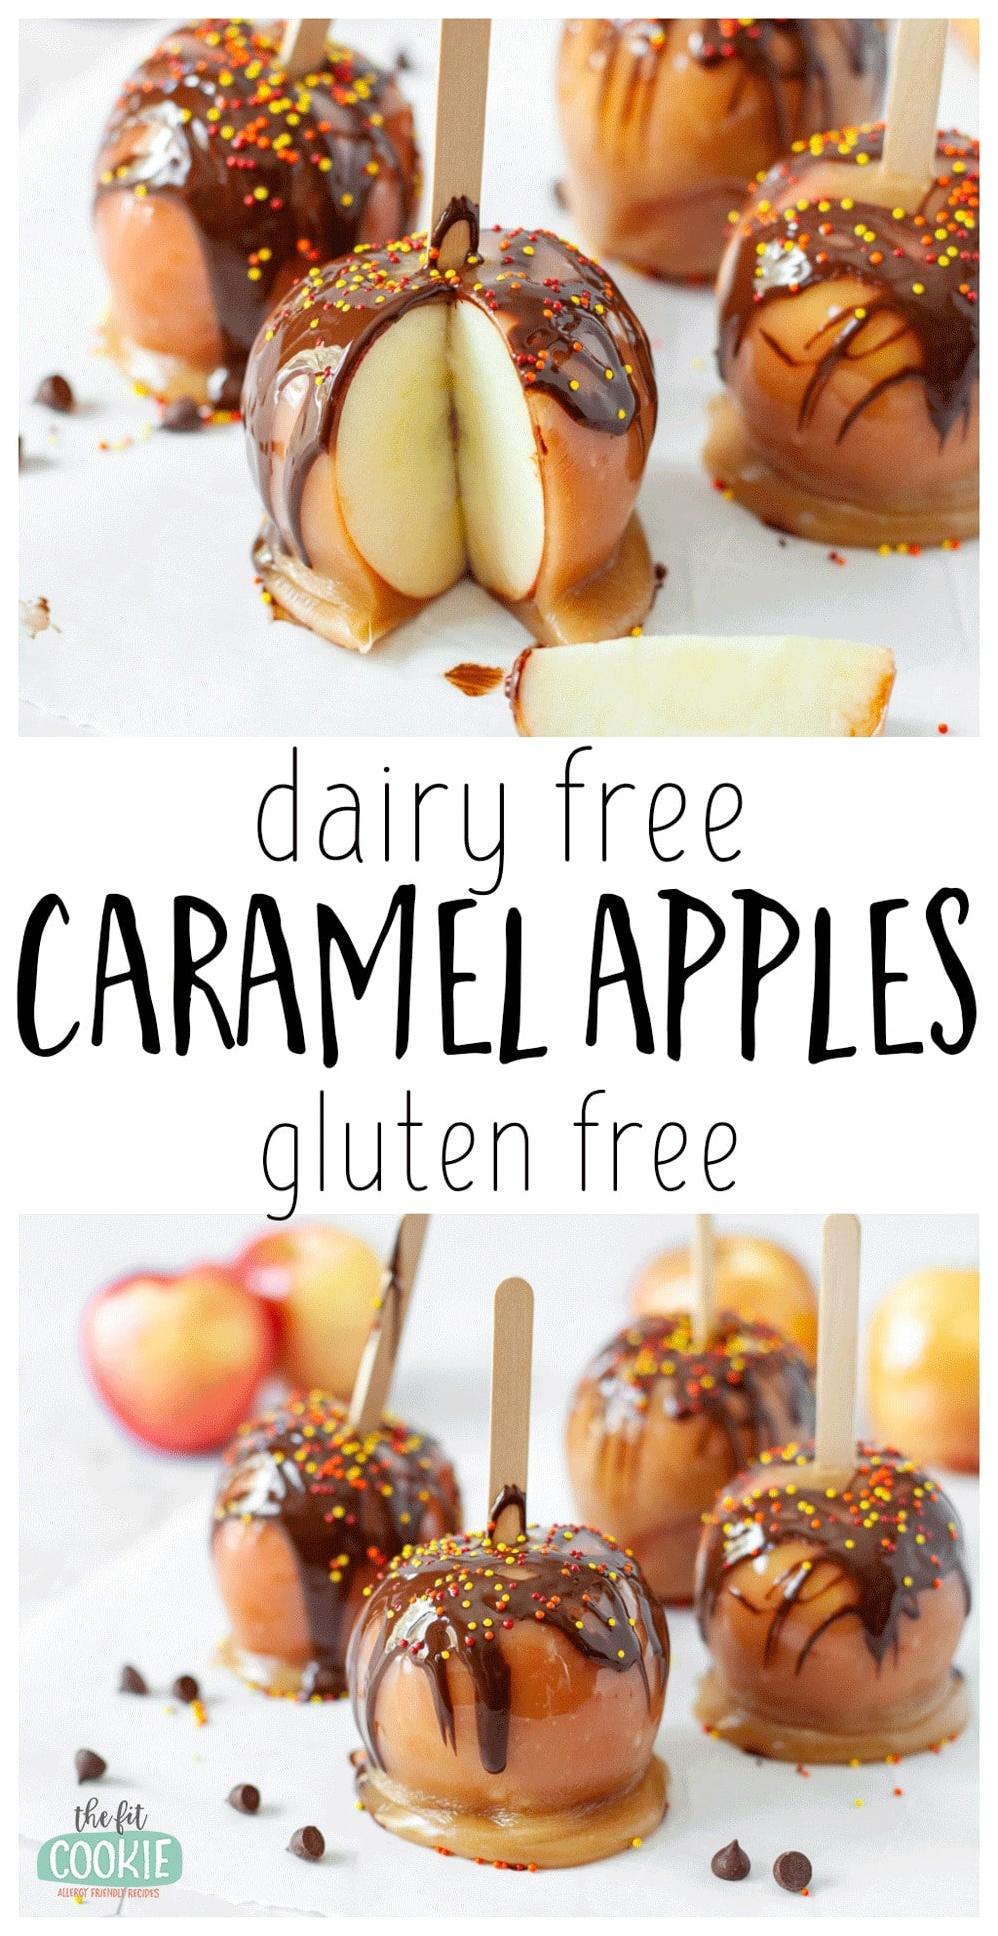  These gluten-free caramel apples are an absolute crowd-pleaser!